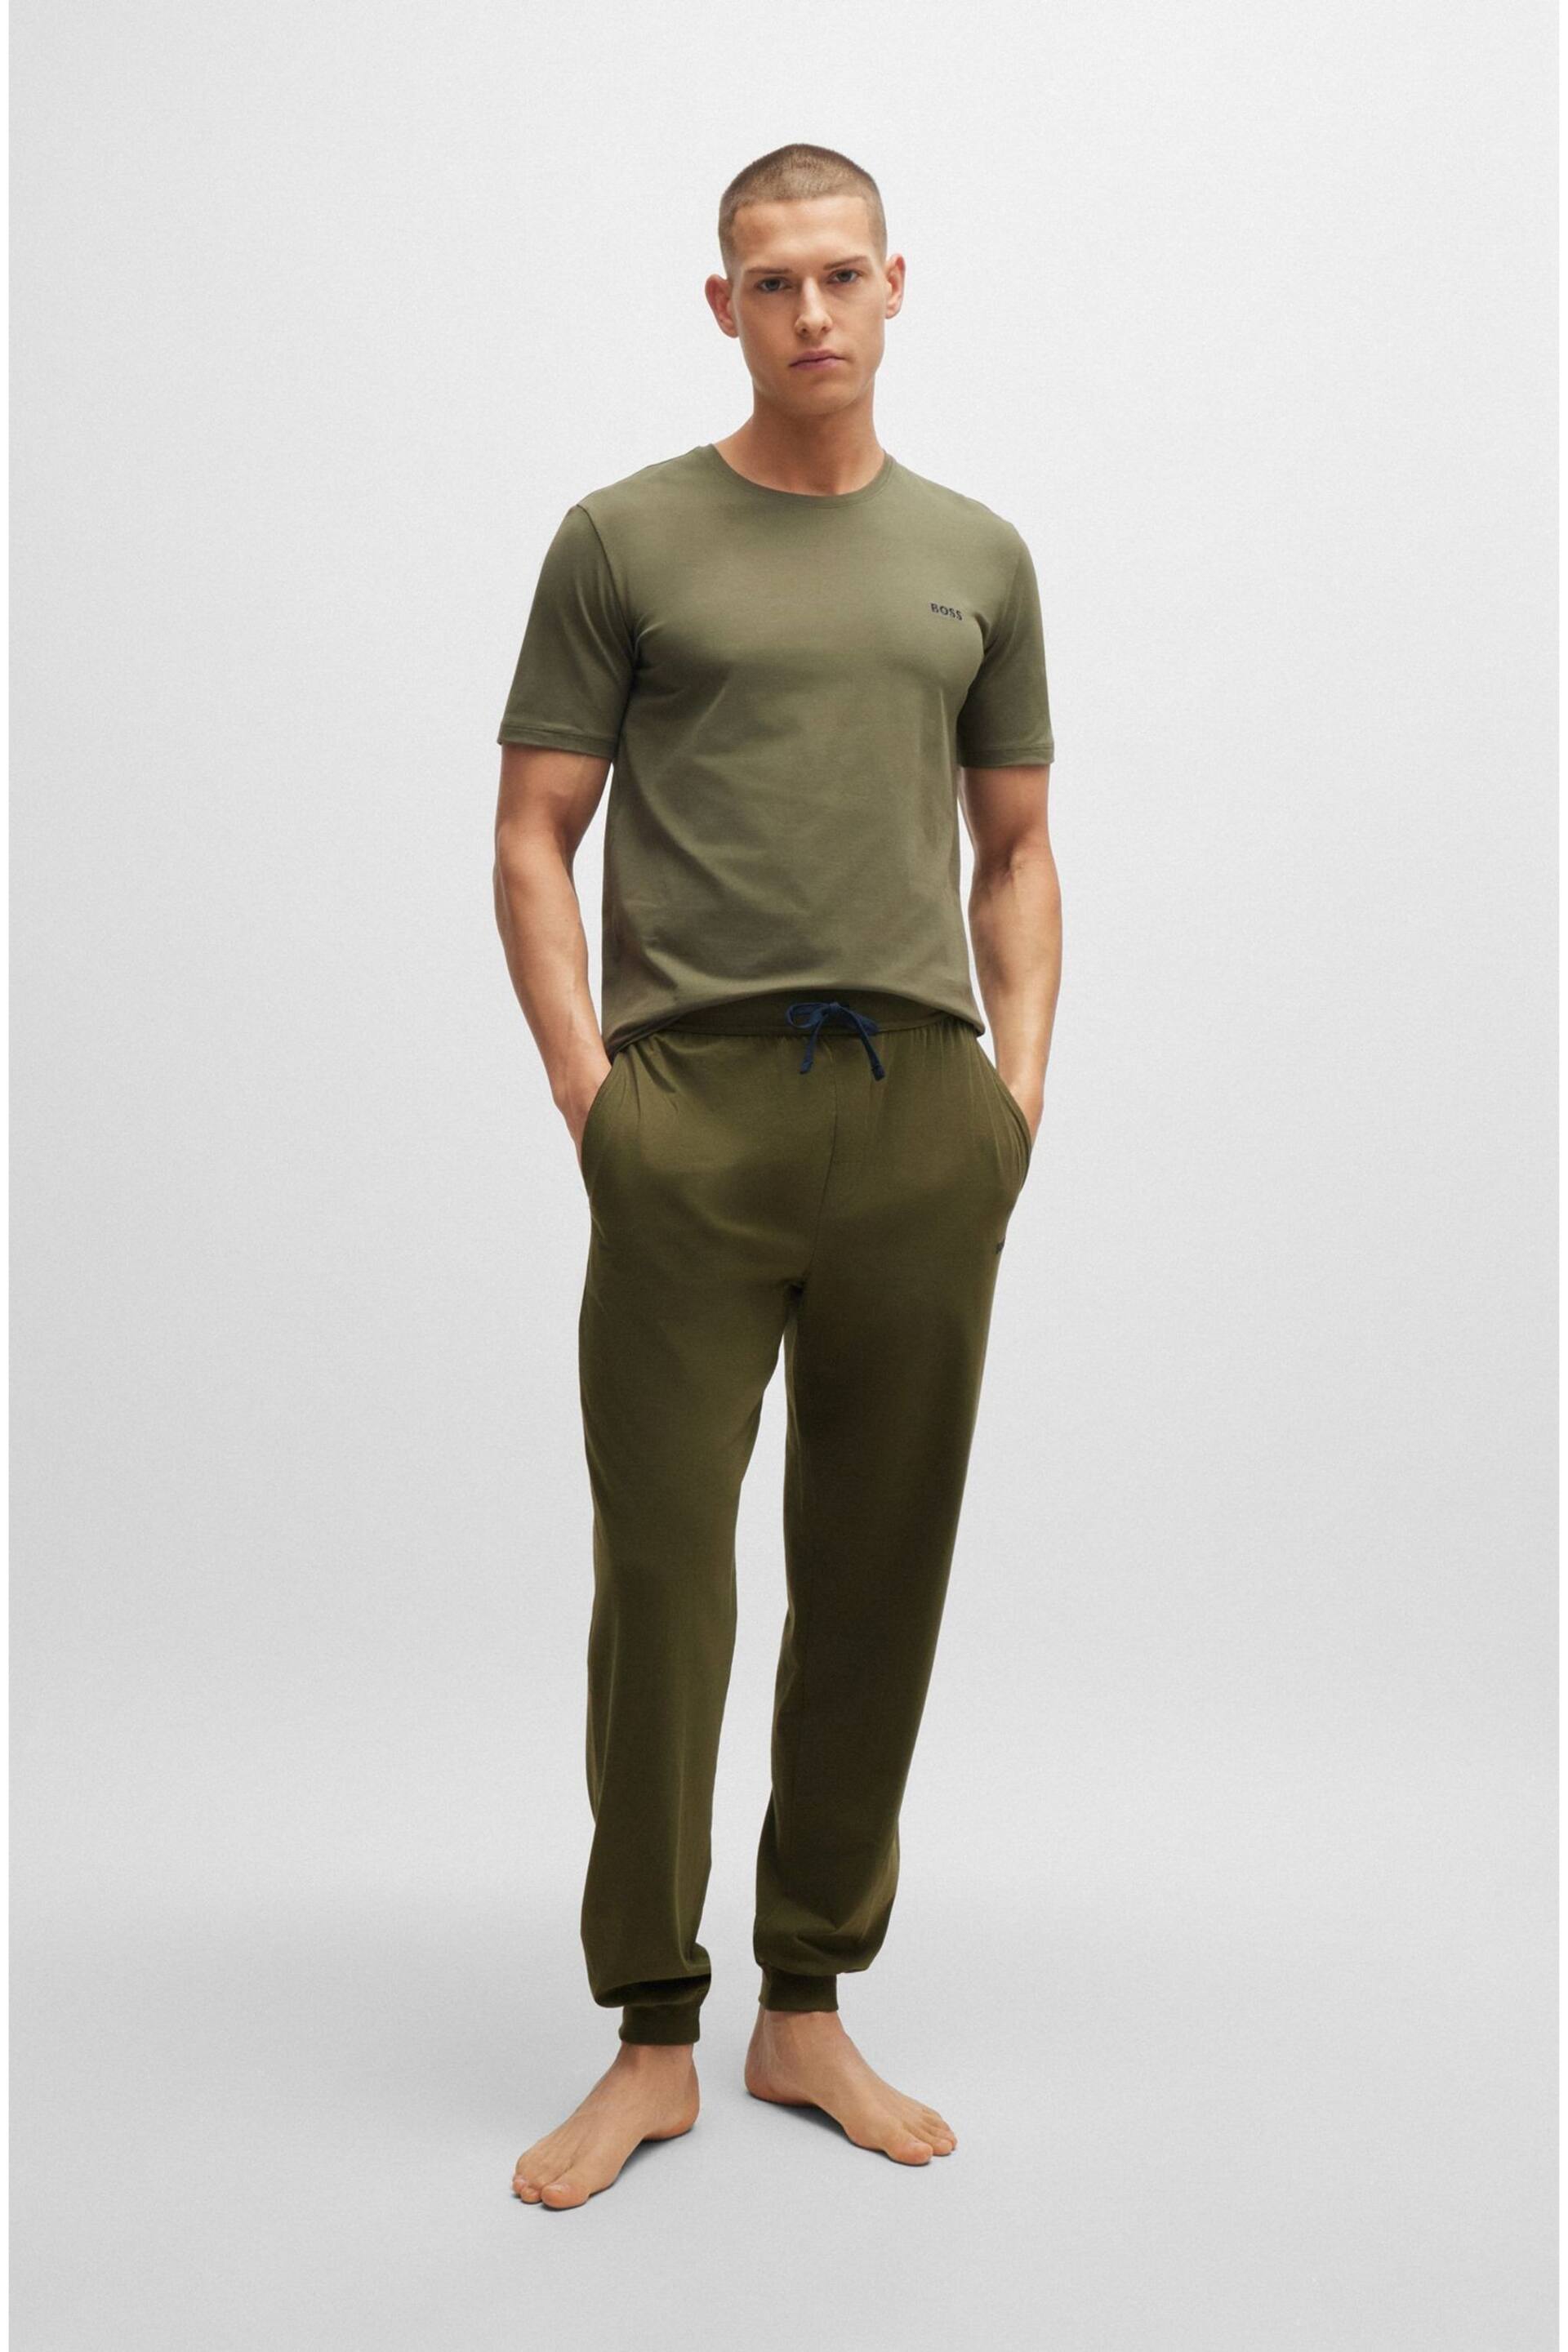 BOSS Green Embroidered Logo Stretch Cotton Joggers - Image 3 of 5